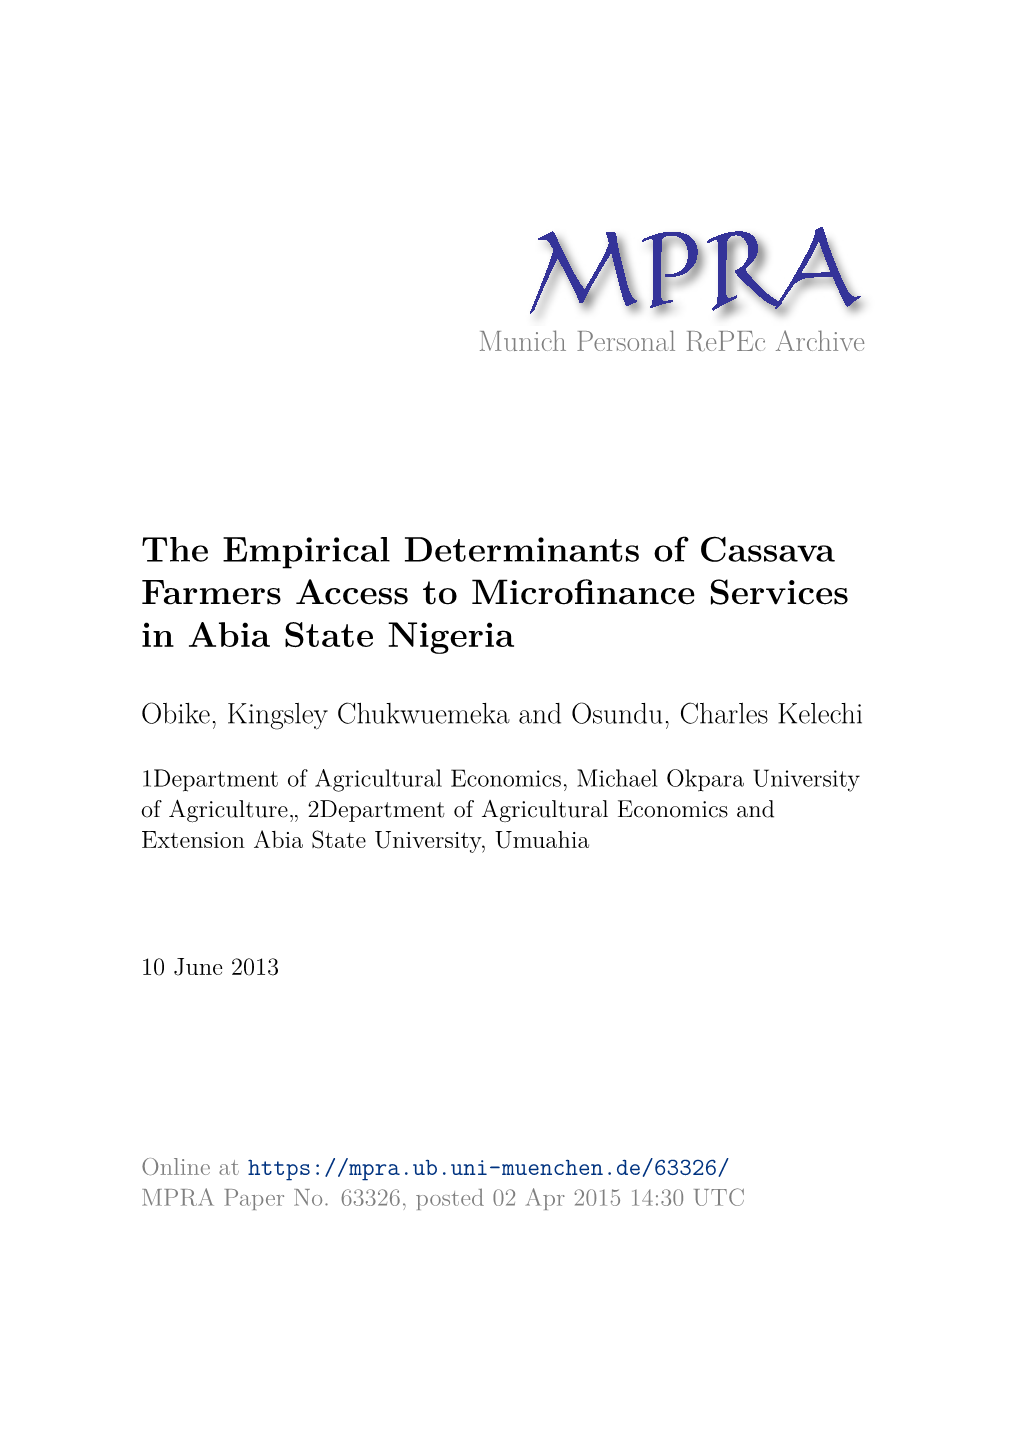 The Empirical Determinants of Cassava Farmers Access to Microﬁnance Services in Abia State Nigeria